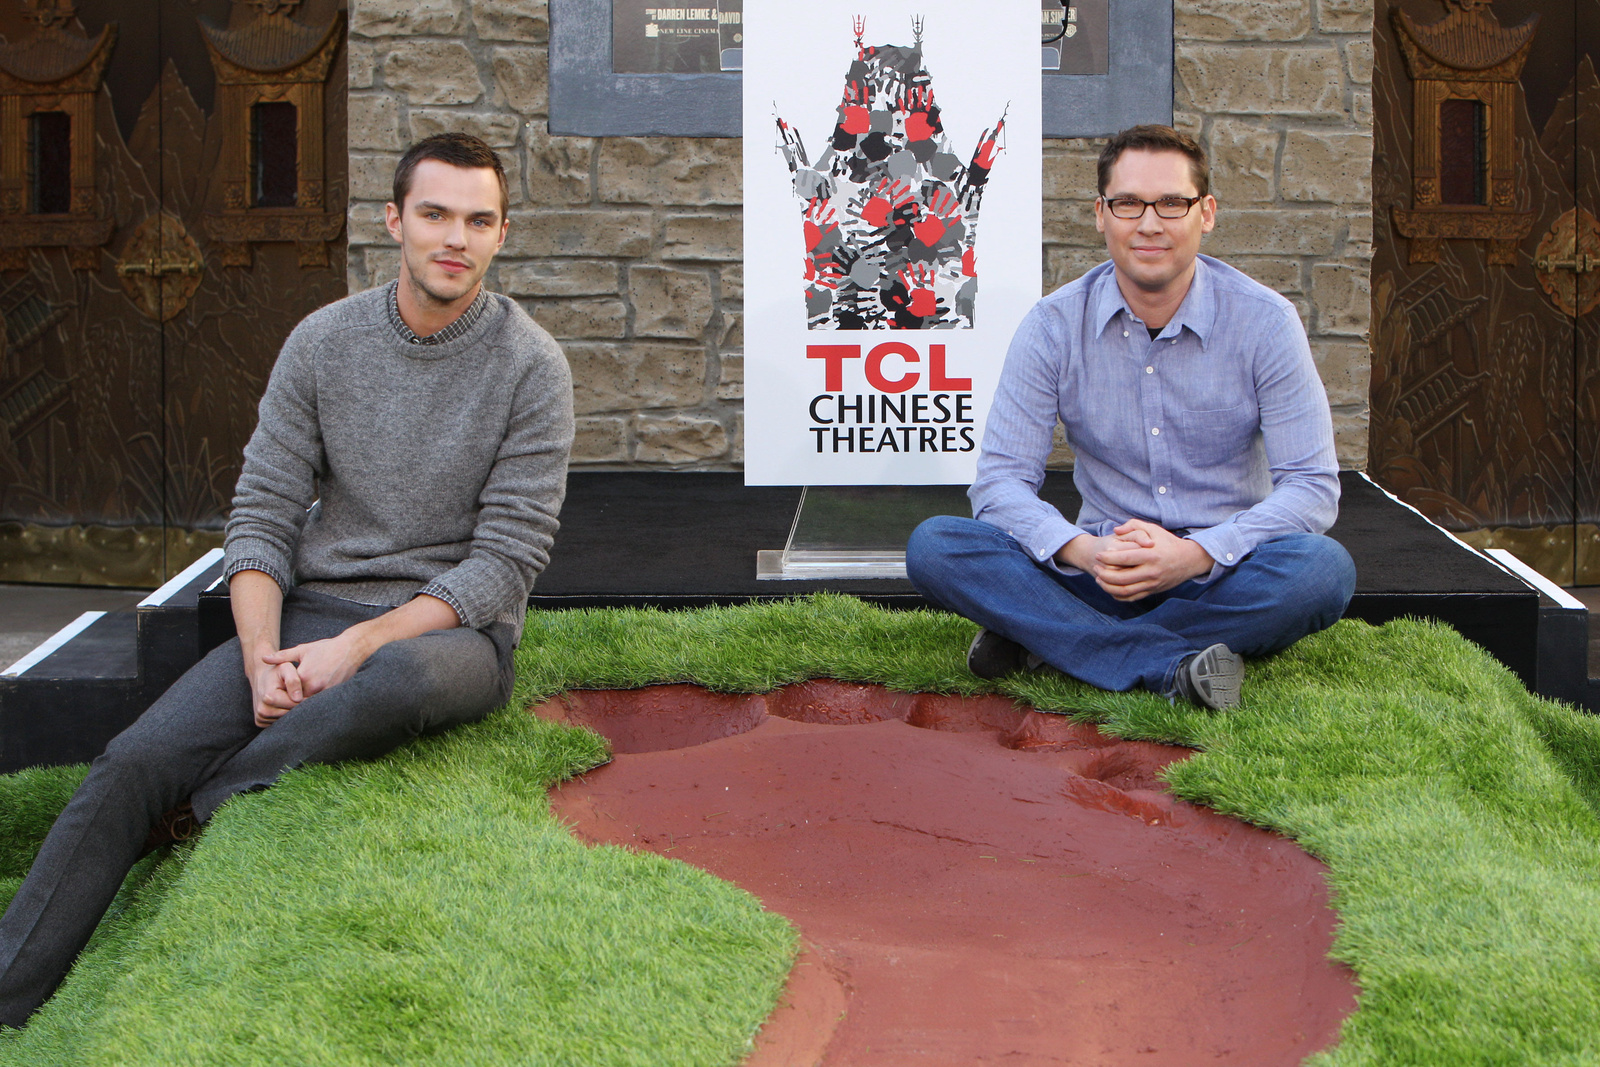 Jack and the Giant Slayer Foot Print Unveiling